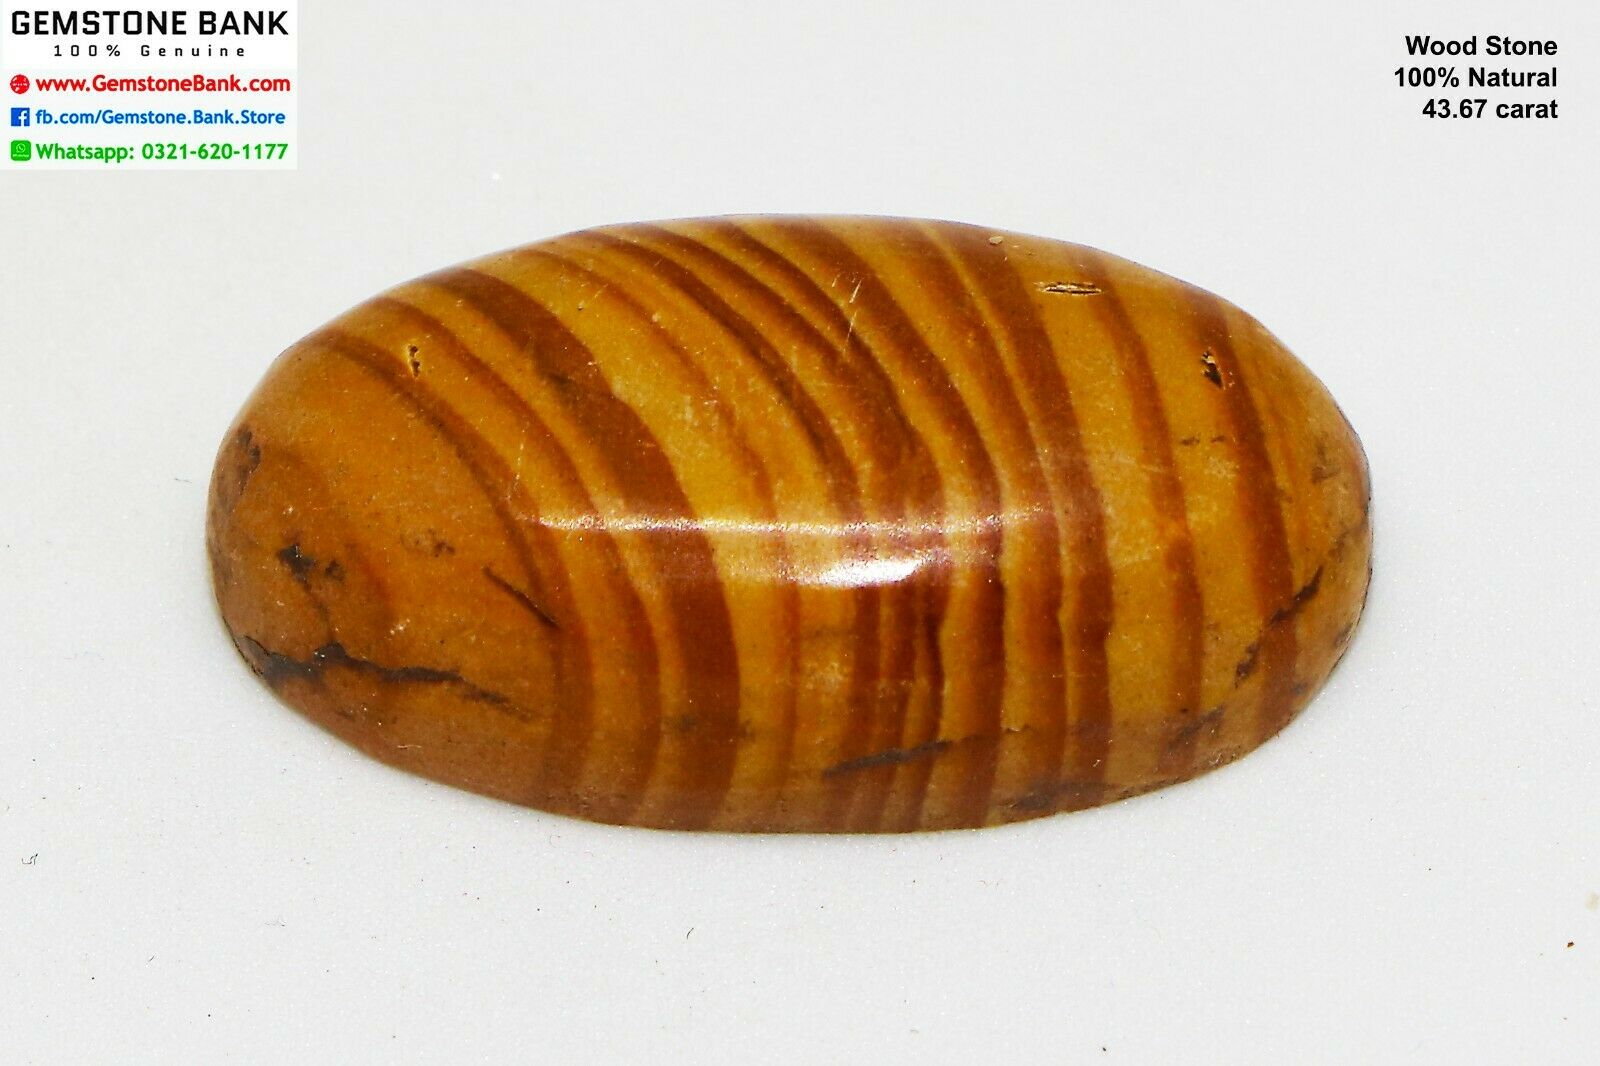 45.67 Ct -certified Natural Wood Stone -petrified Wood Oval Cabochon